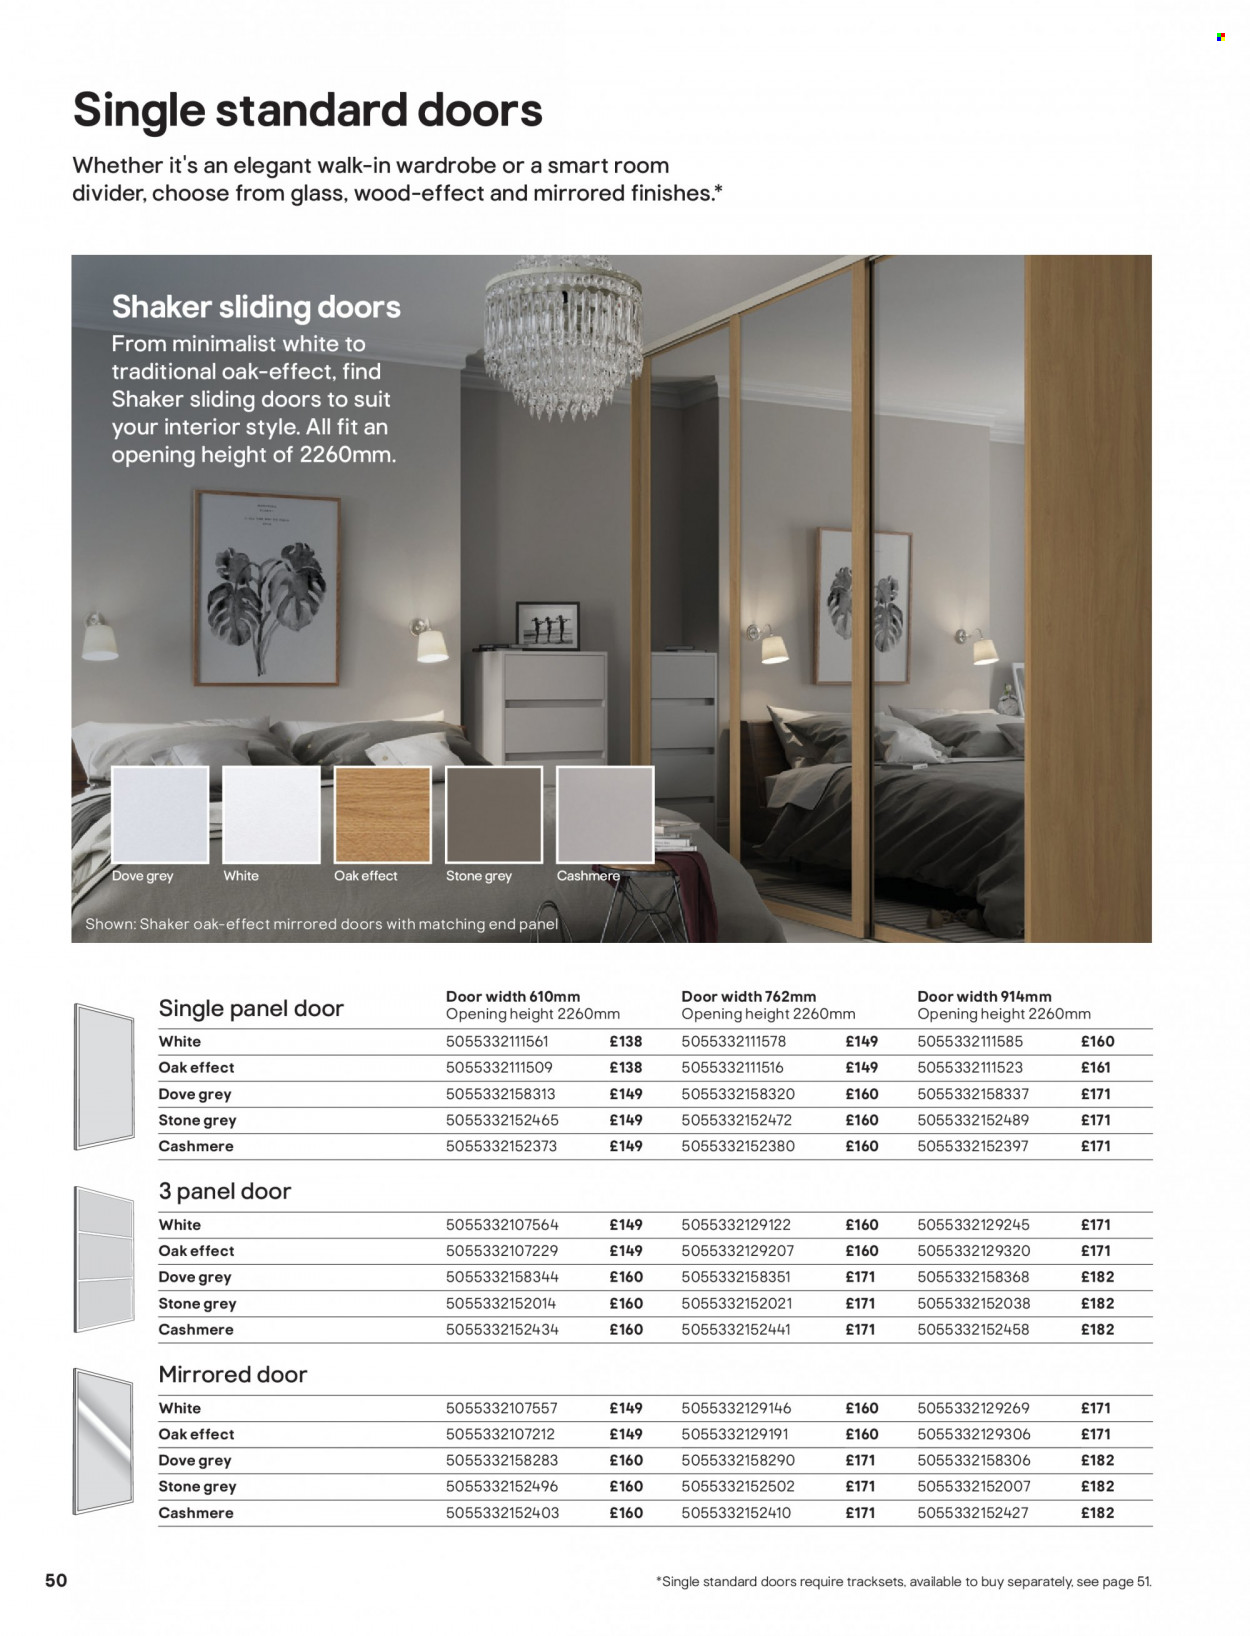 thumbnail - B&Q offer  - Sales products - accesory shelf, wardrobe, sliding door. Page 50.